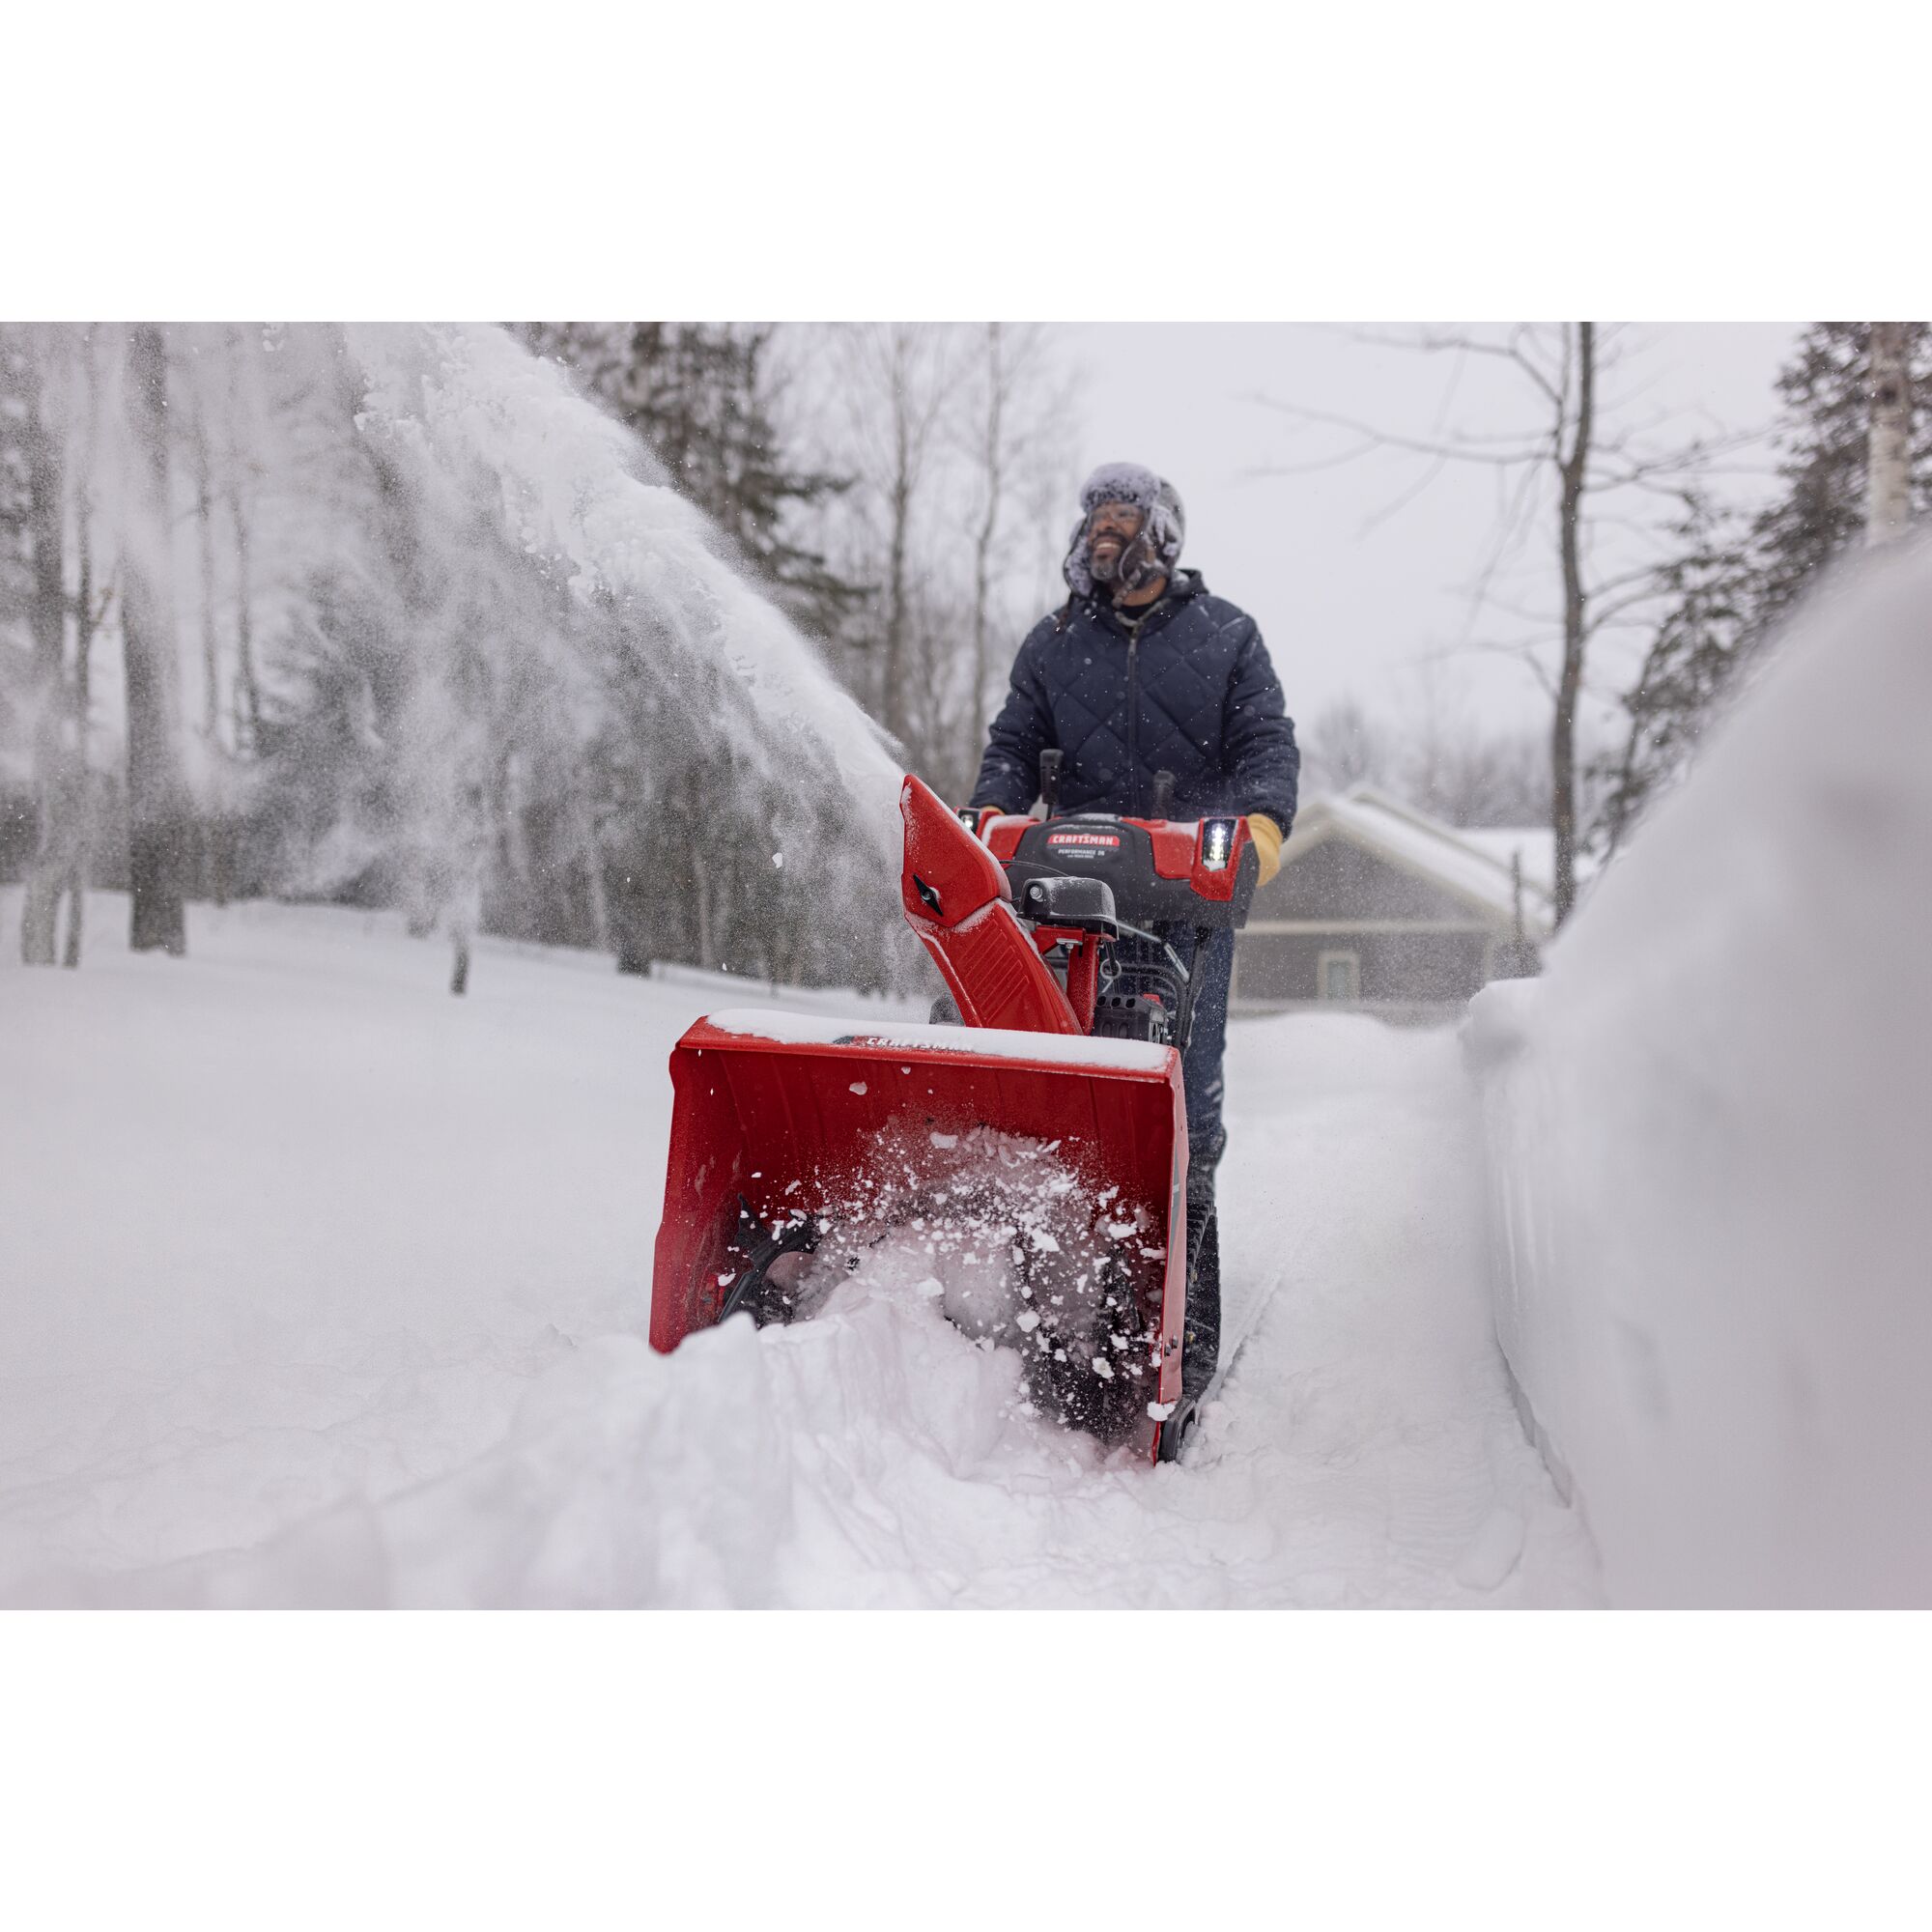 CRAFTSMAN Performance 26 Track Gas Snow Blower clearing snow with trees and house in background